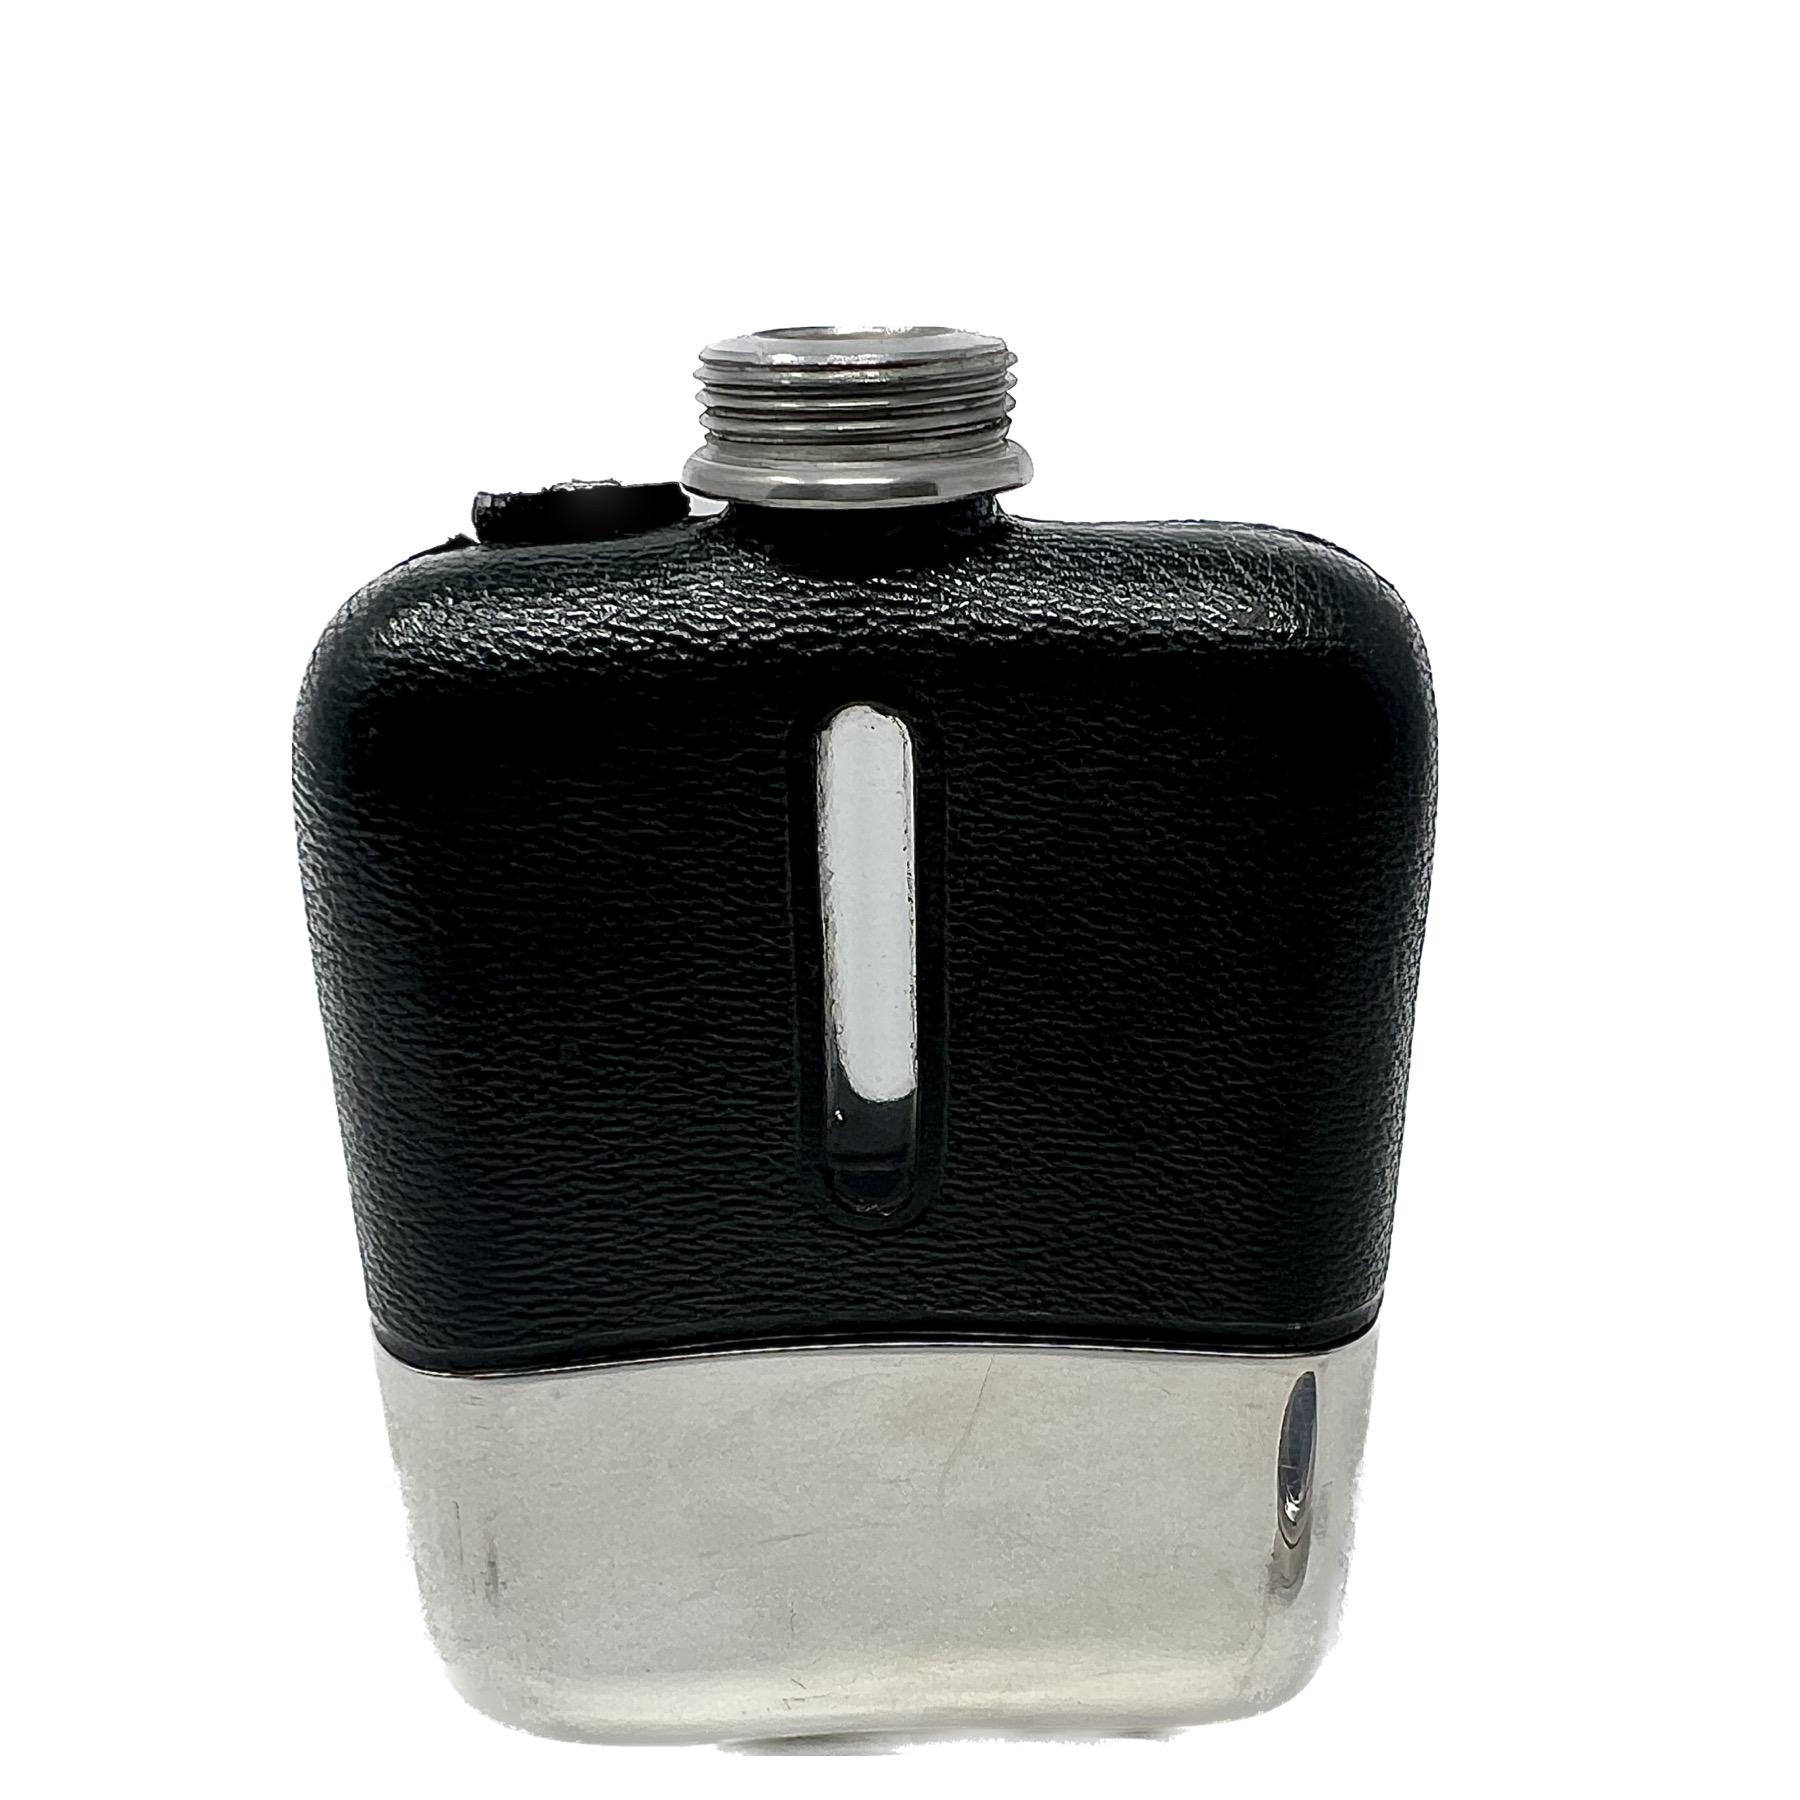 20th Century Antique American Art Deco Silver-Plate and Leather Drinking Flask, Circa 1920. For Sale